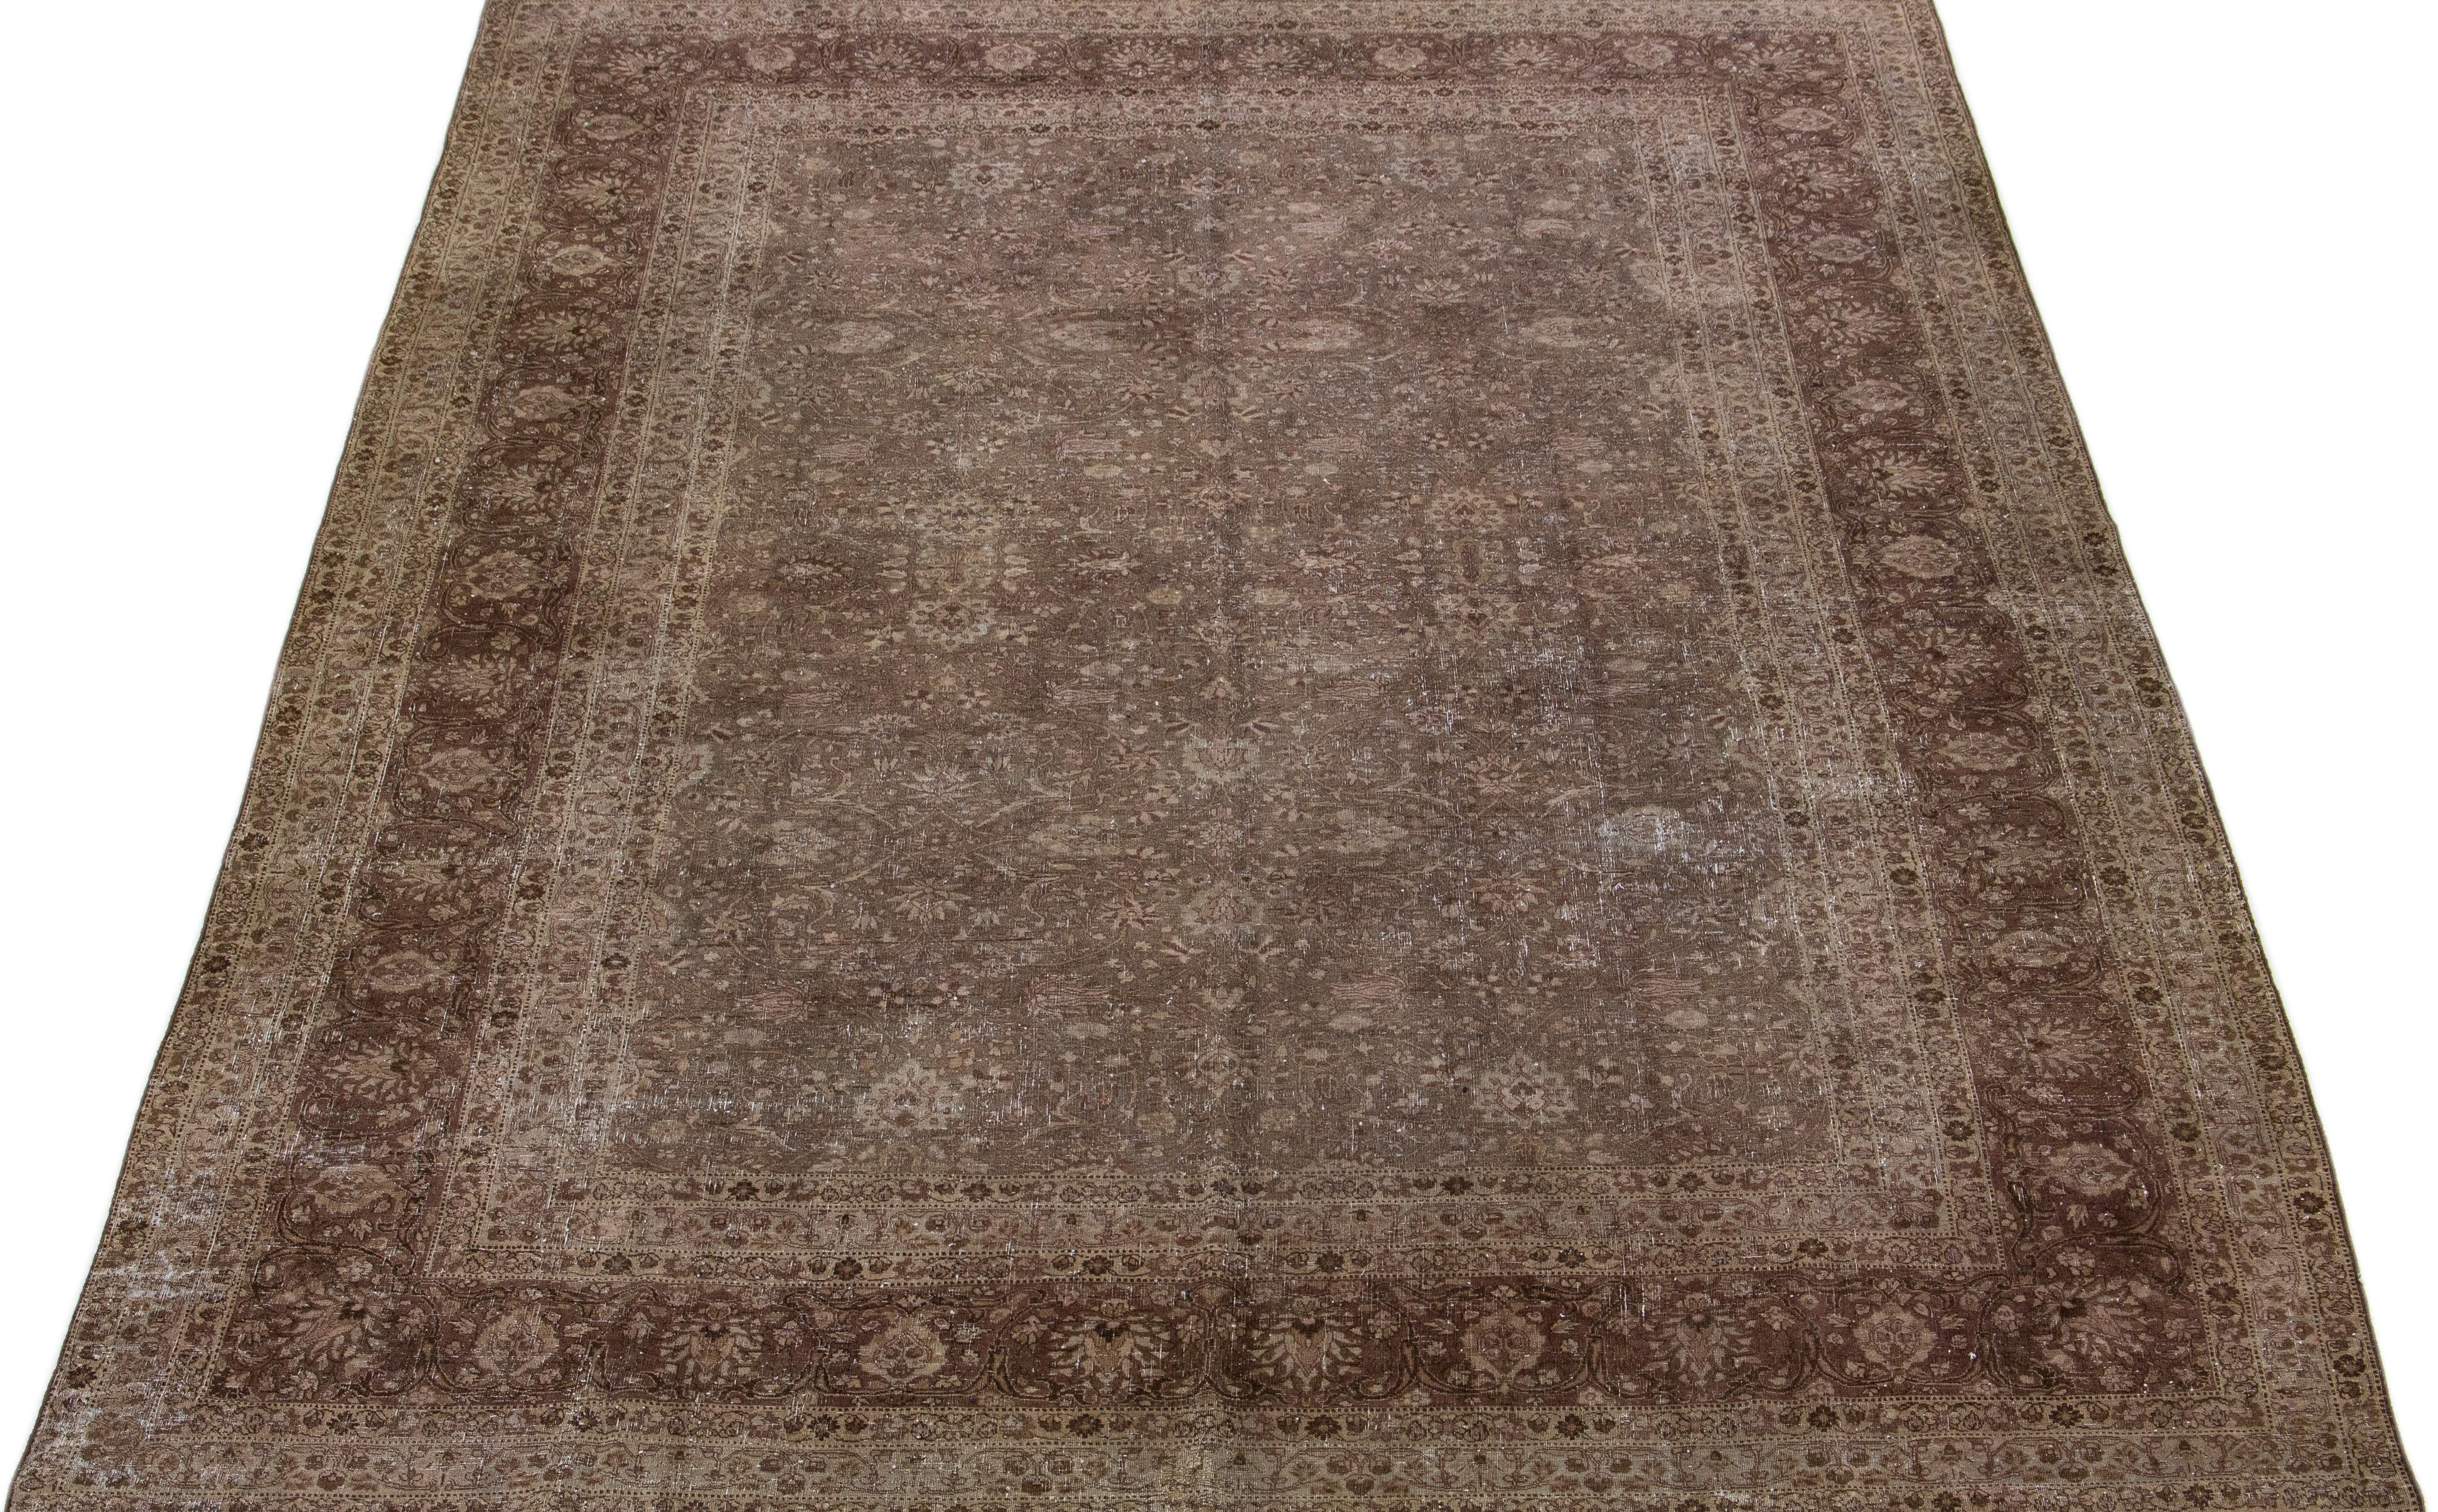 Beautiful antique Persian distressed Tabriz hand-knotted wool rug with a brown color field. This piece has a rusted frame with beige and gray accents in a gorgeous all-over floral design.

This rug measures: 10'6' x 14'10